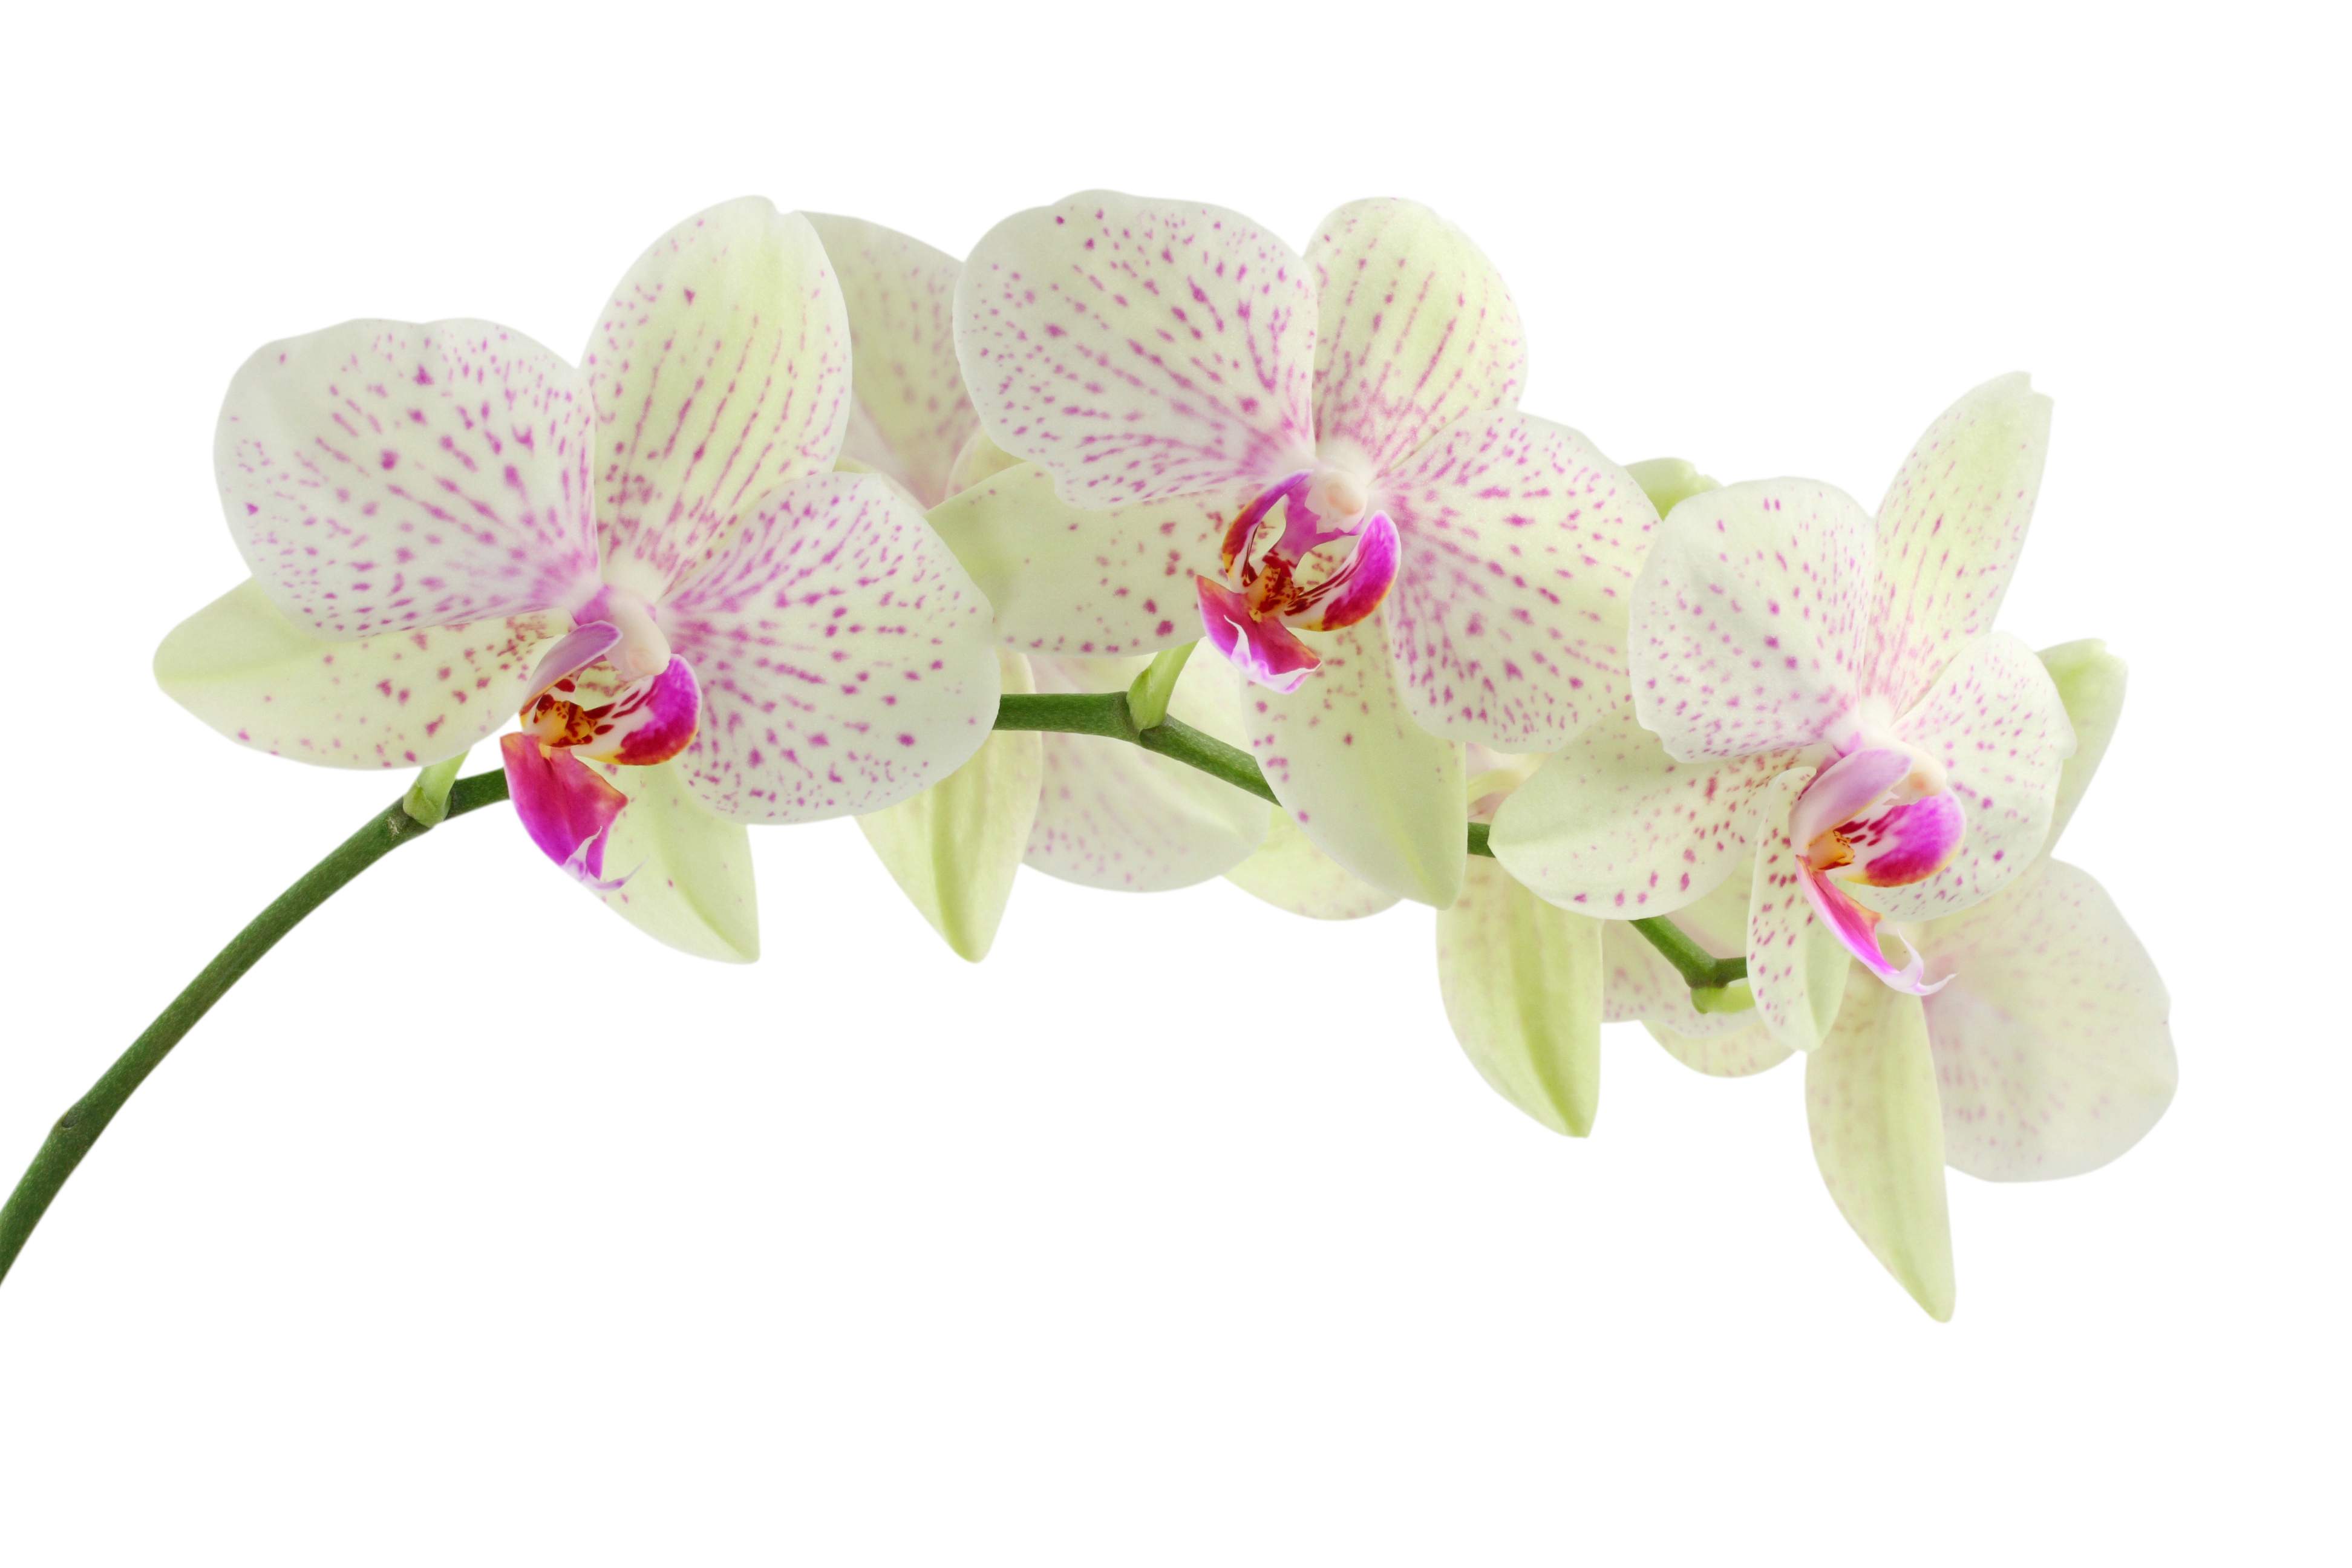 Orchid Flower Wallpaper. Orchid Flower Picture